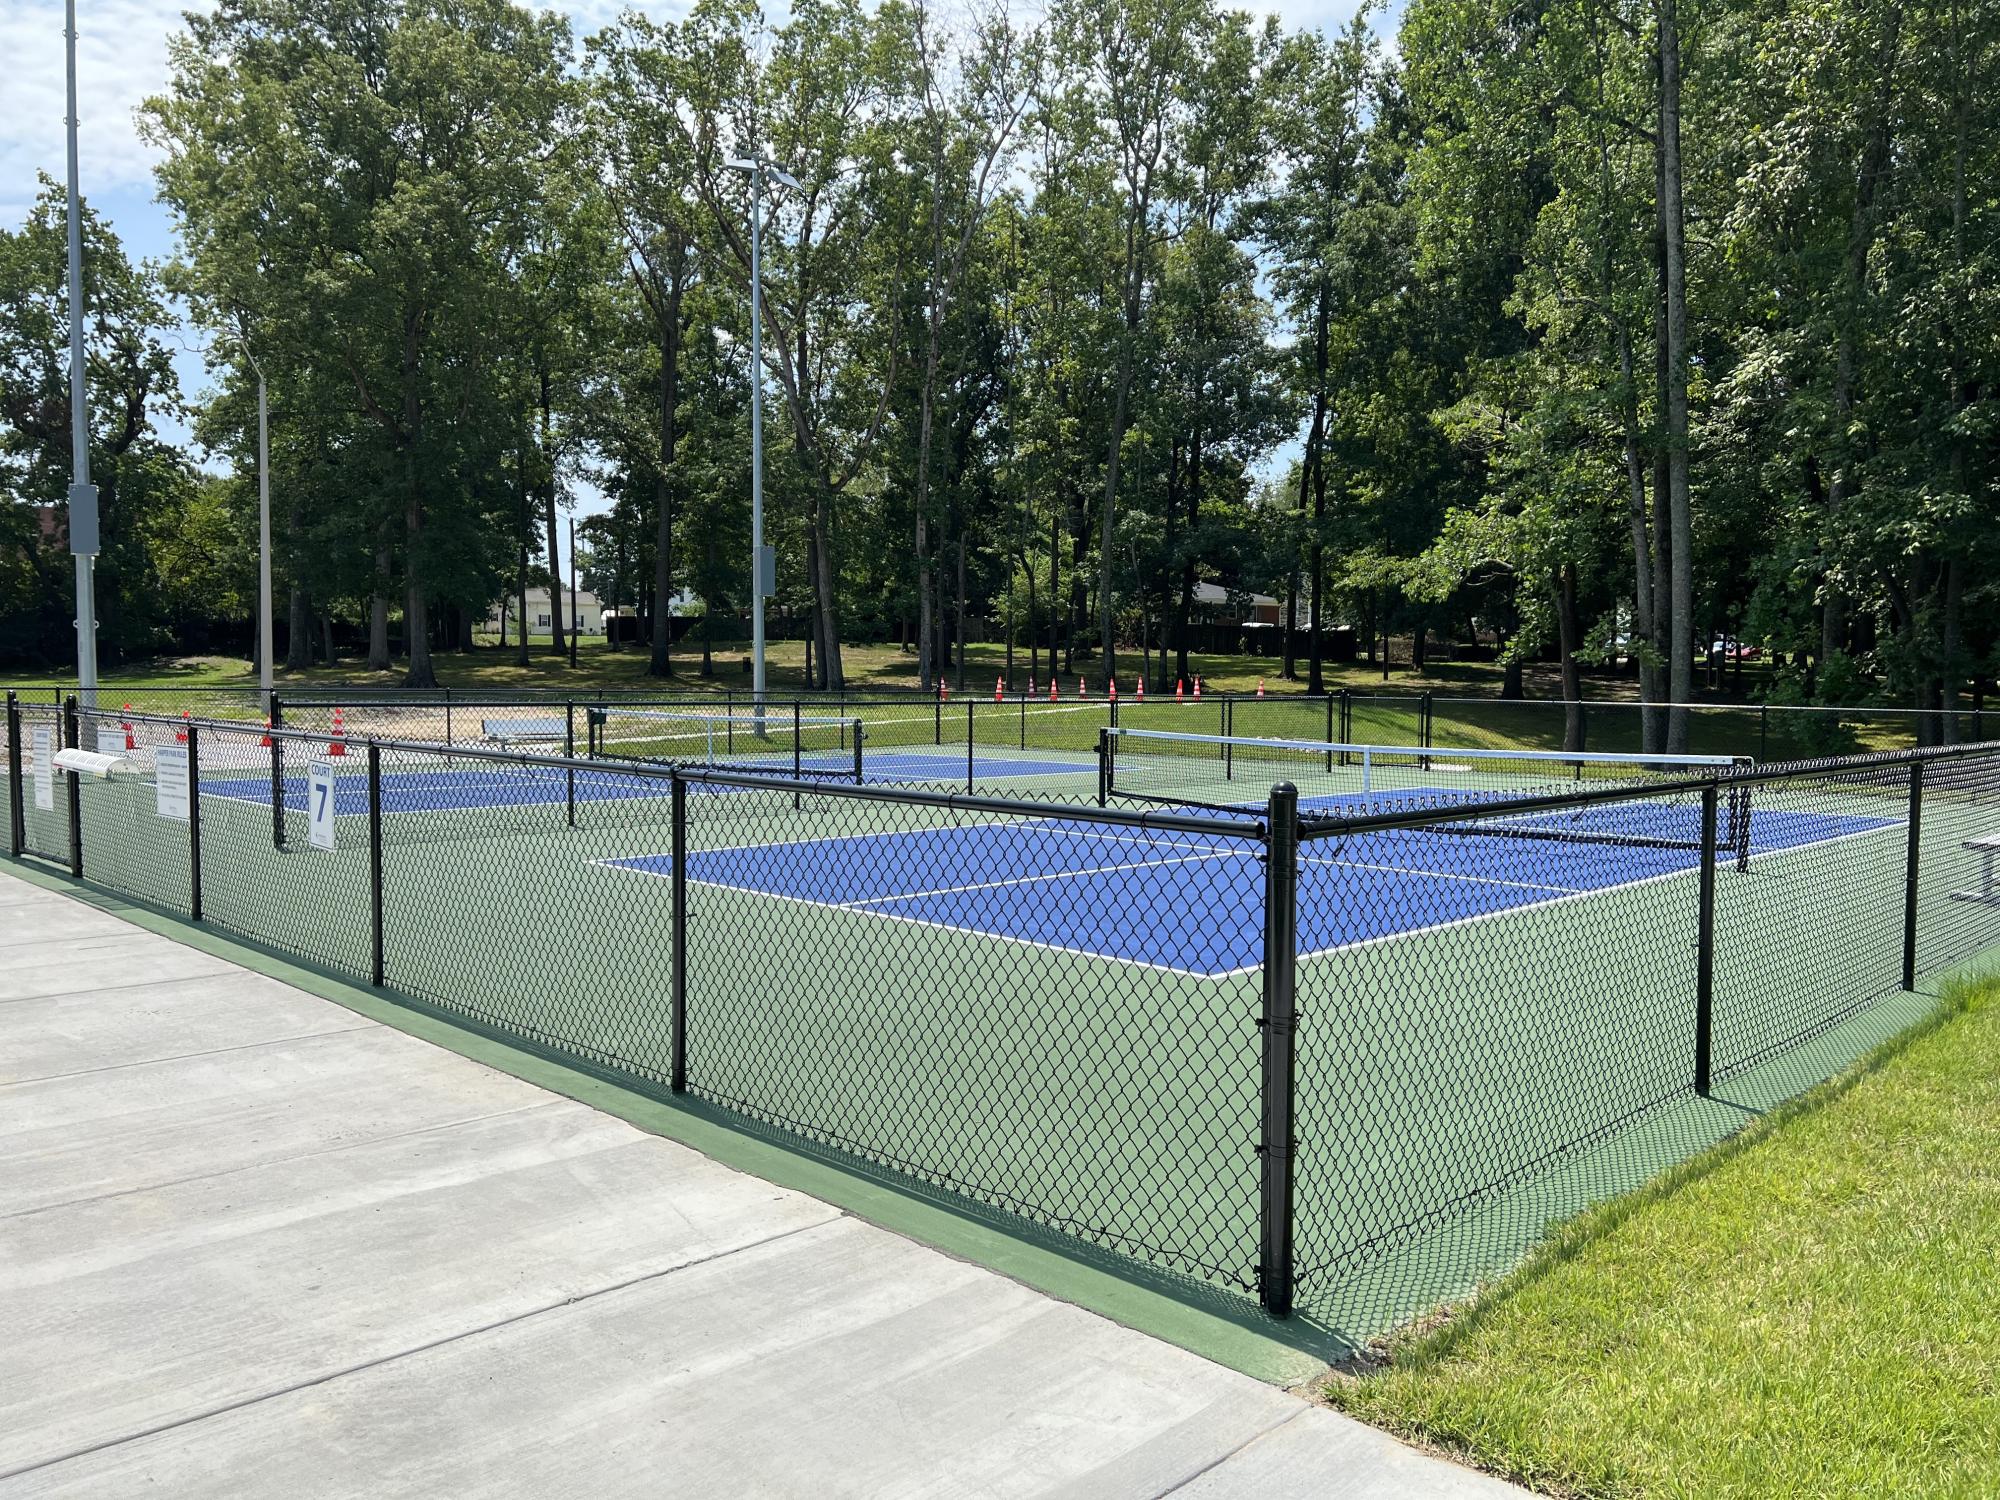 Pickleball Courts 7 and 8